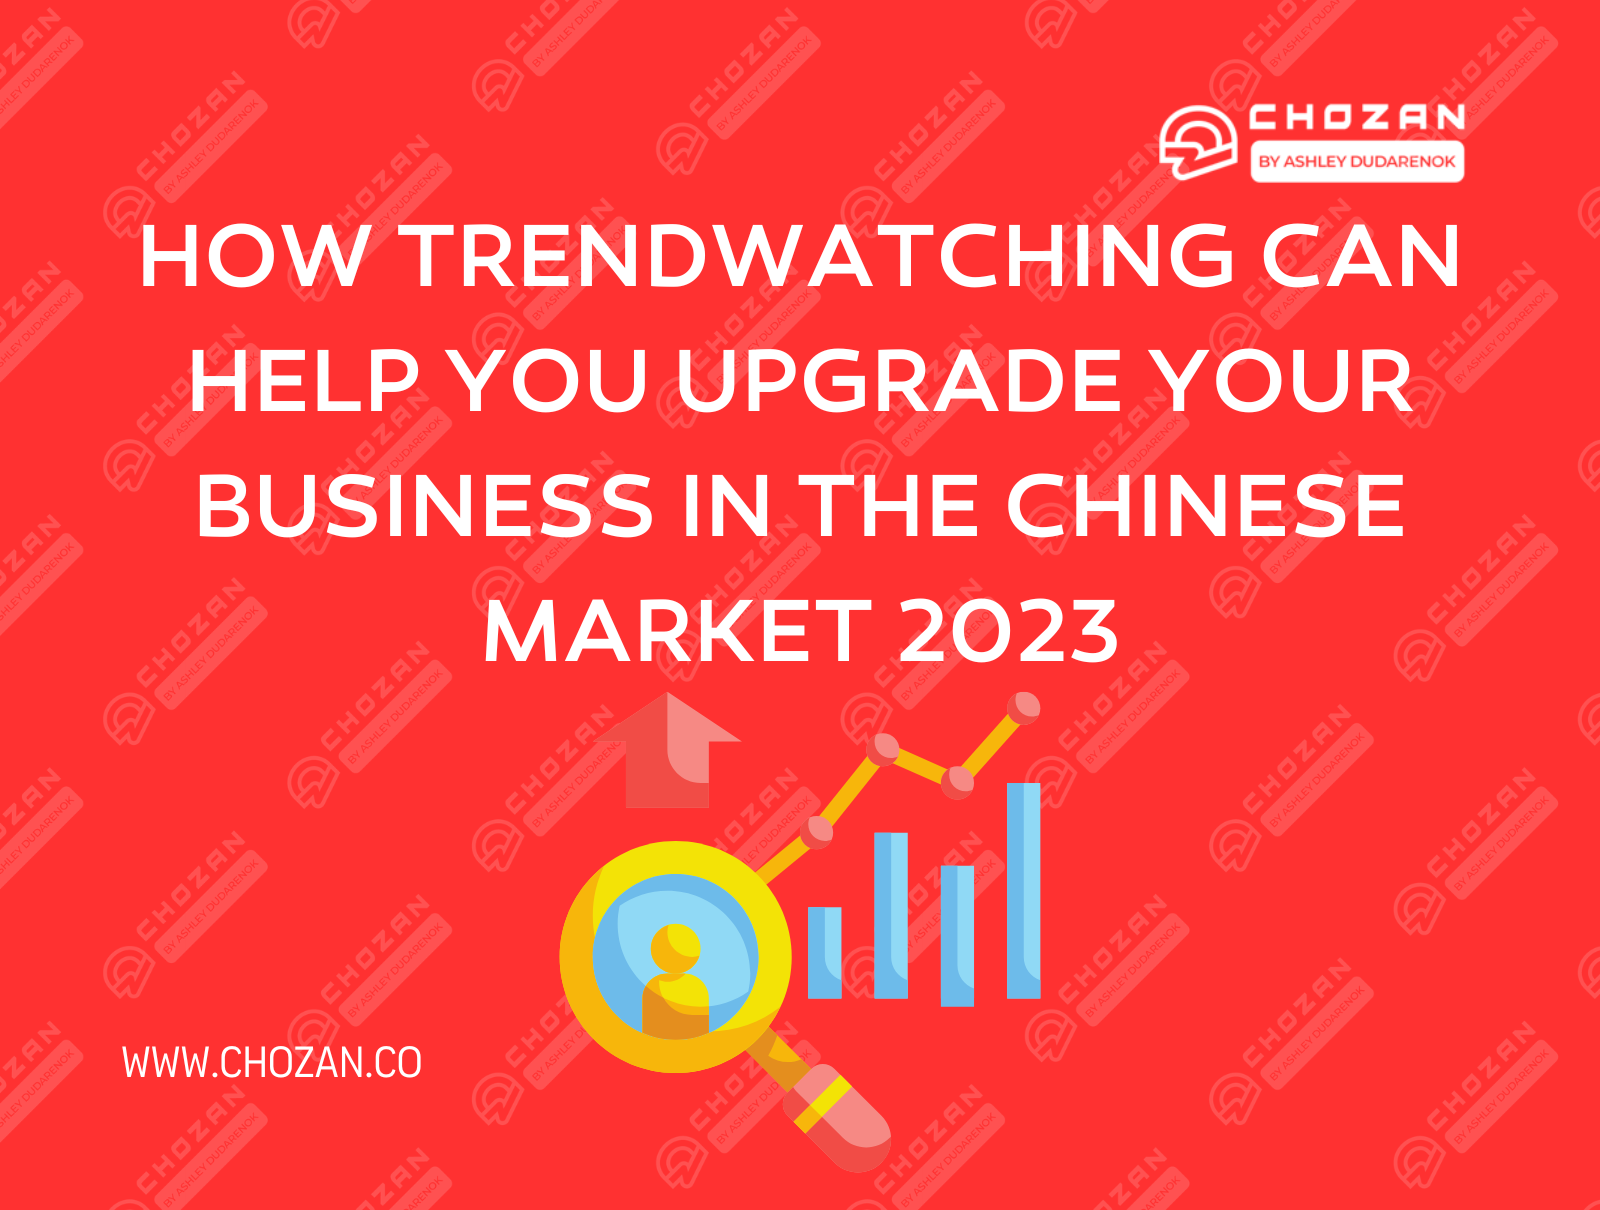 How Trendwatching Can Help You Upgrade Your Business In The Chinese Market 2023